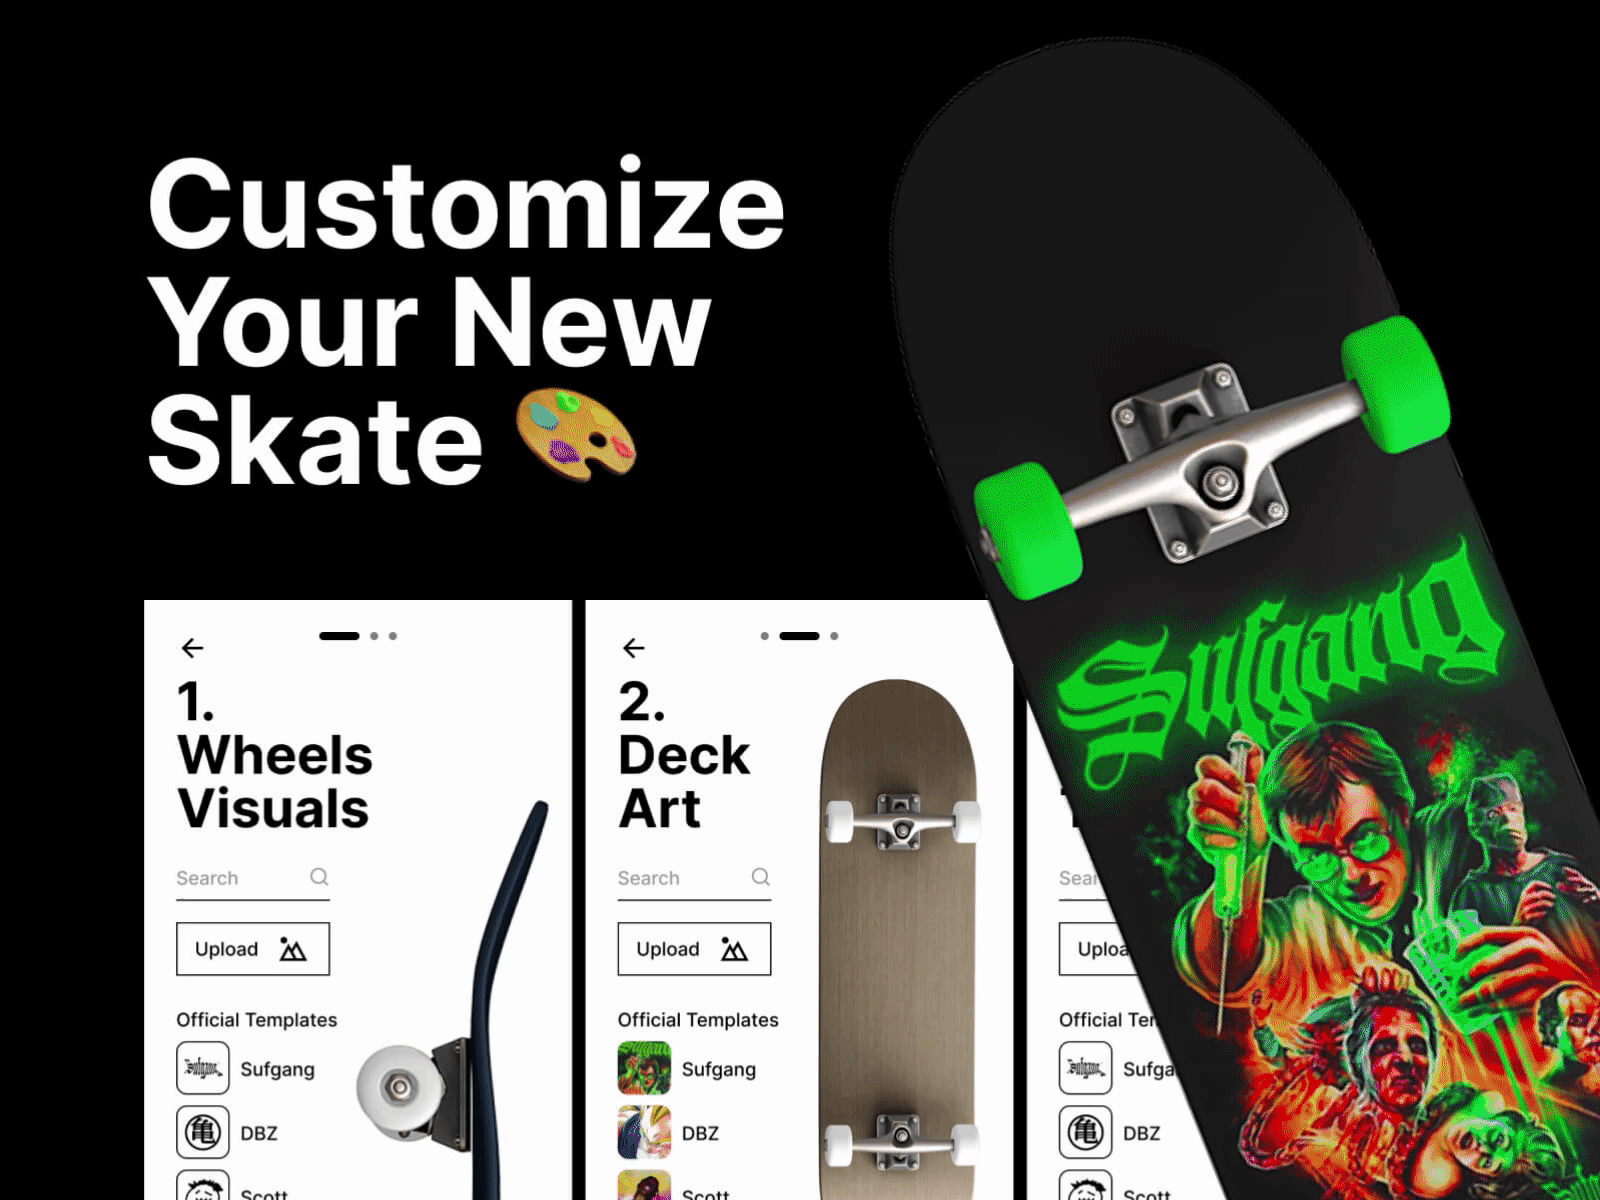 Customize your new skate